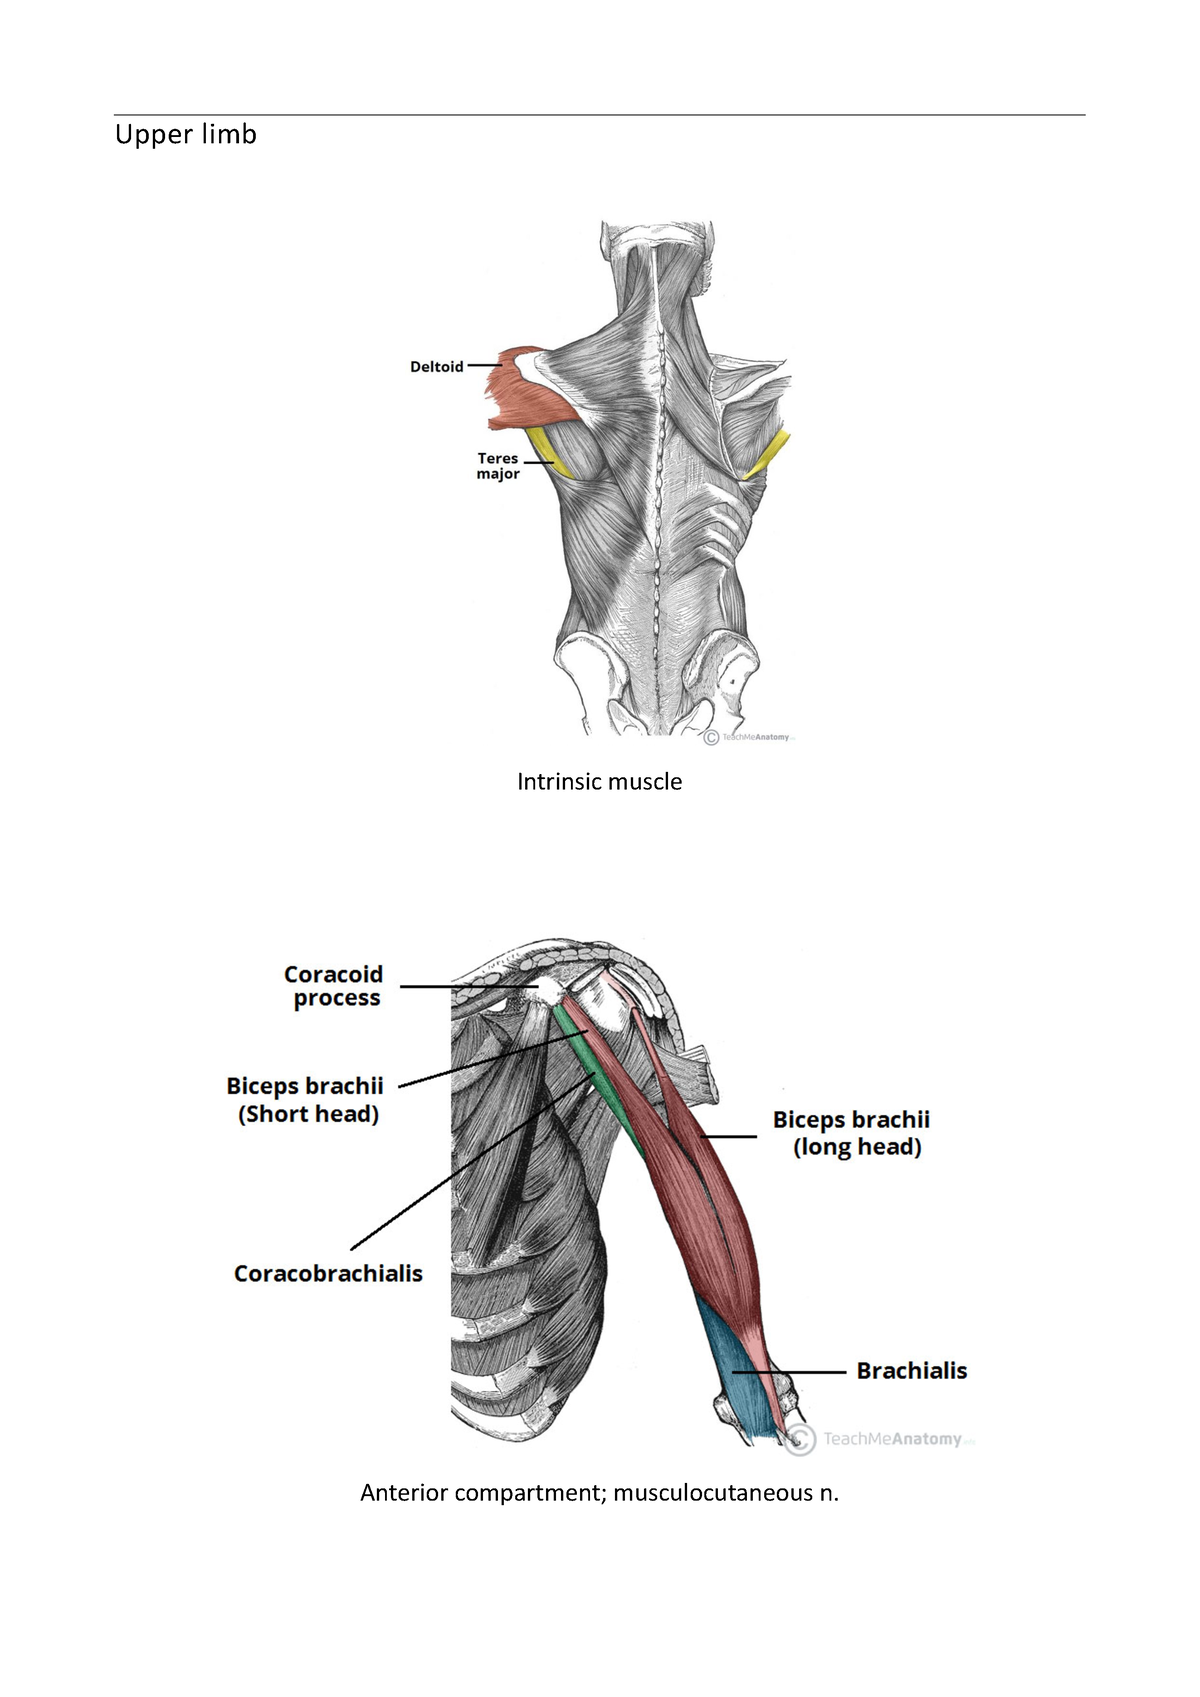 MSK - MSK - Upper limb Intrinsic muscle Anterior compartment